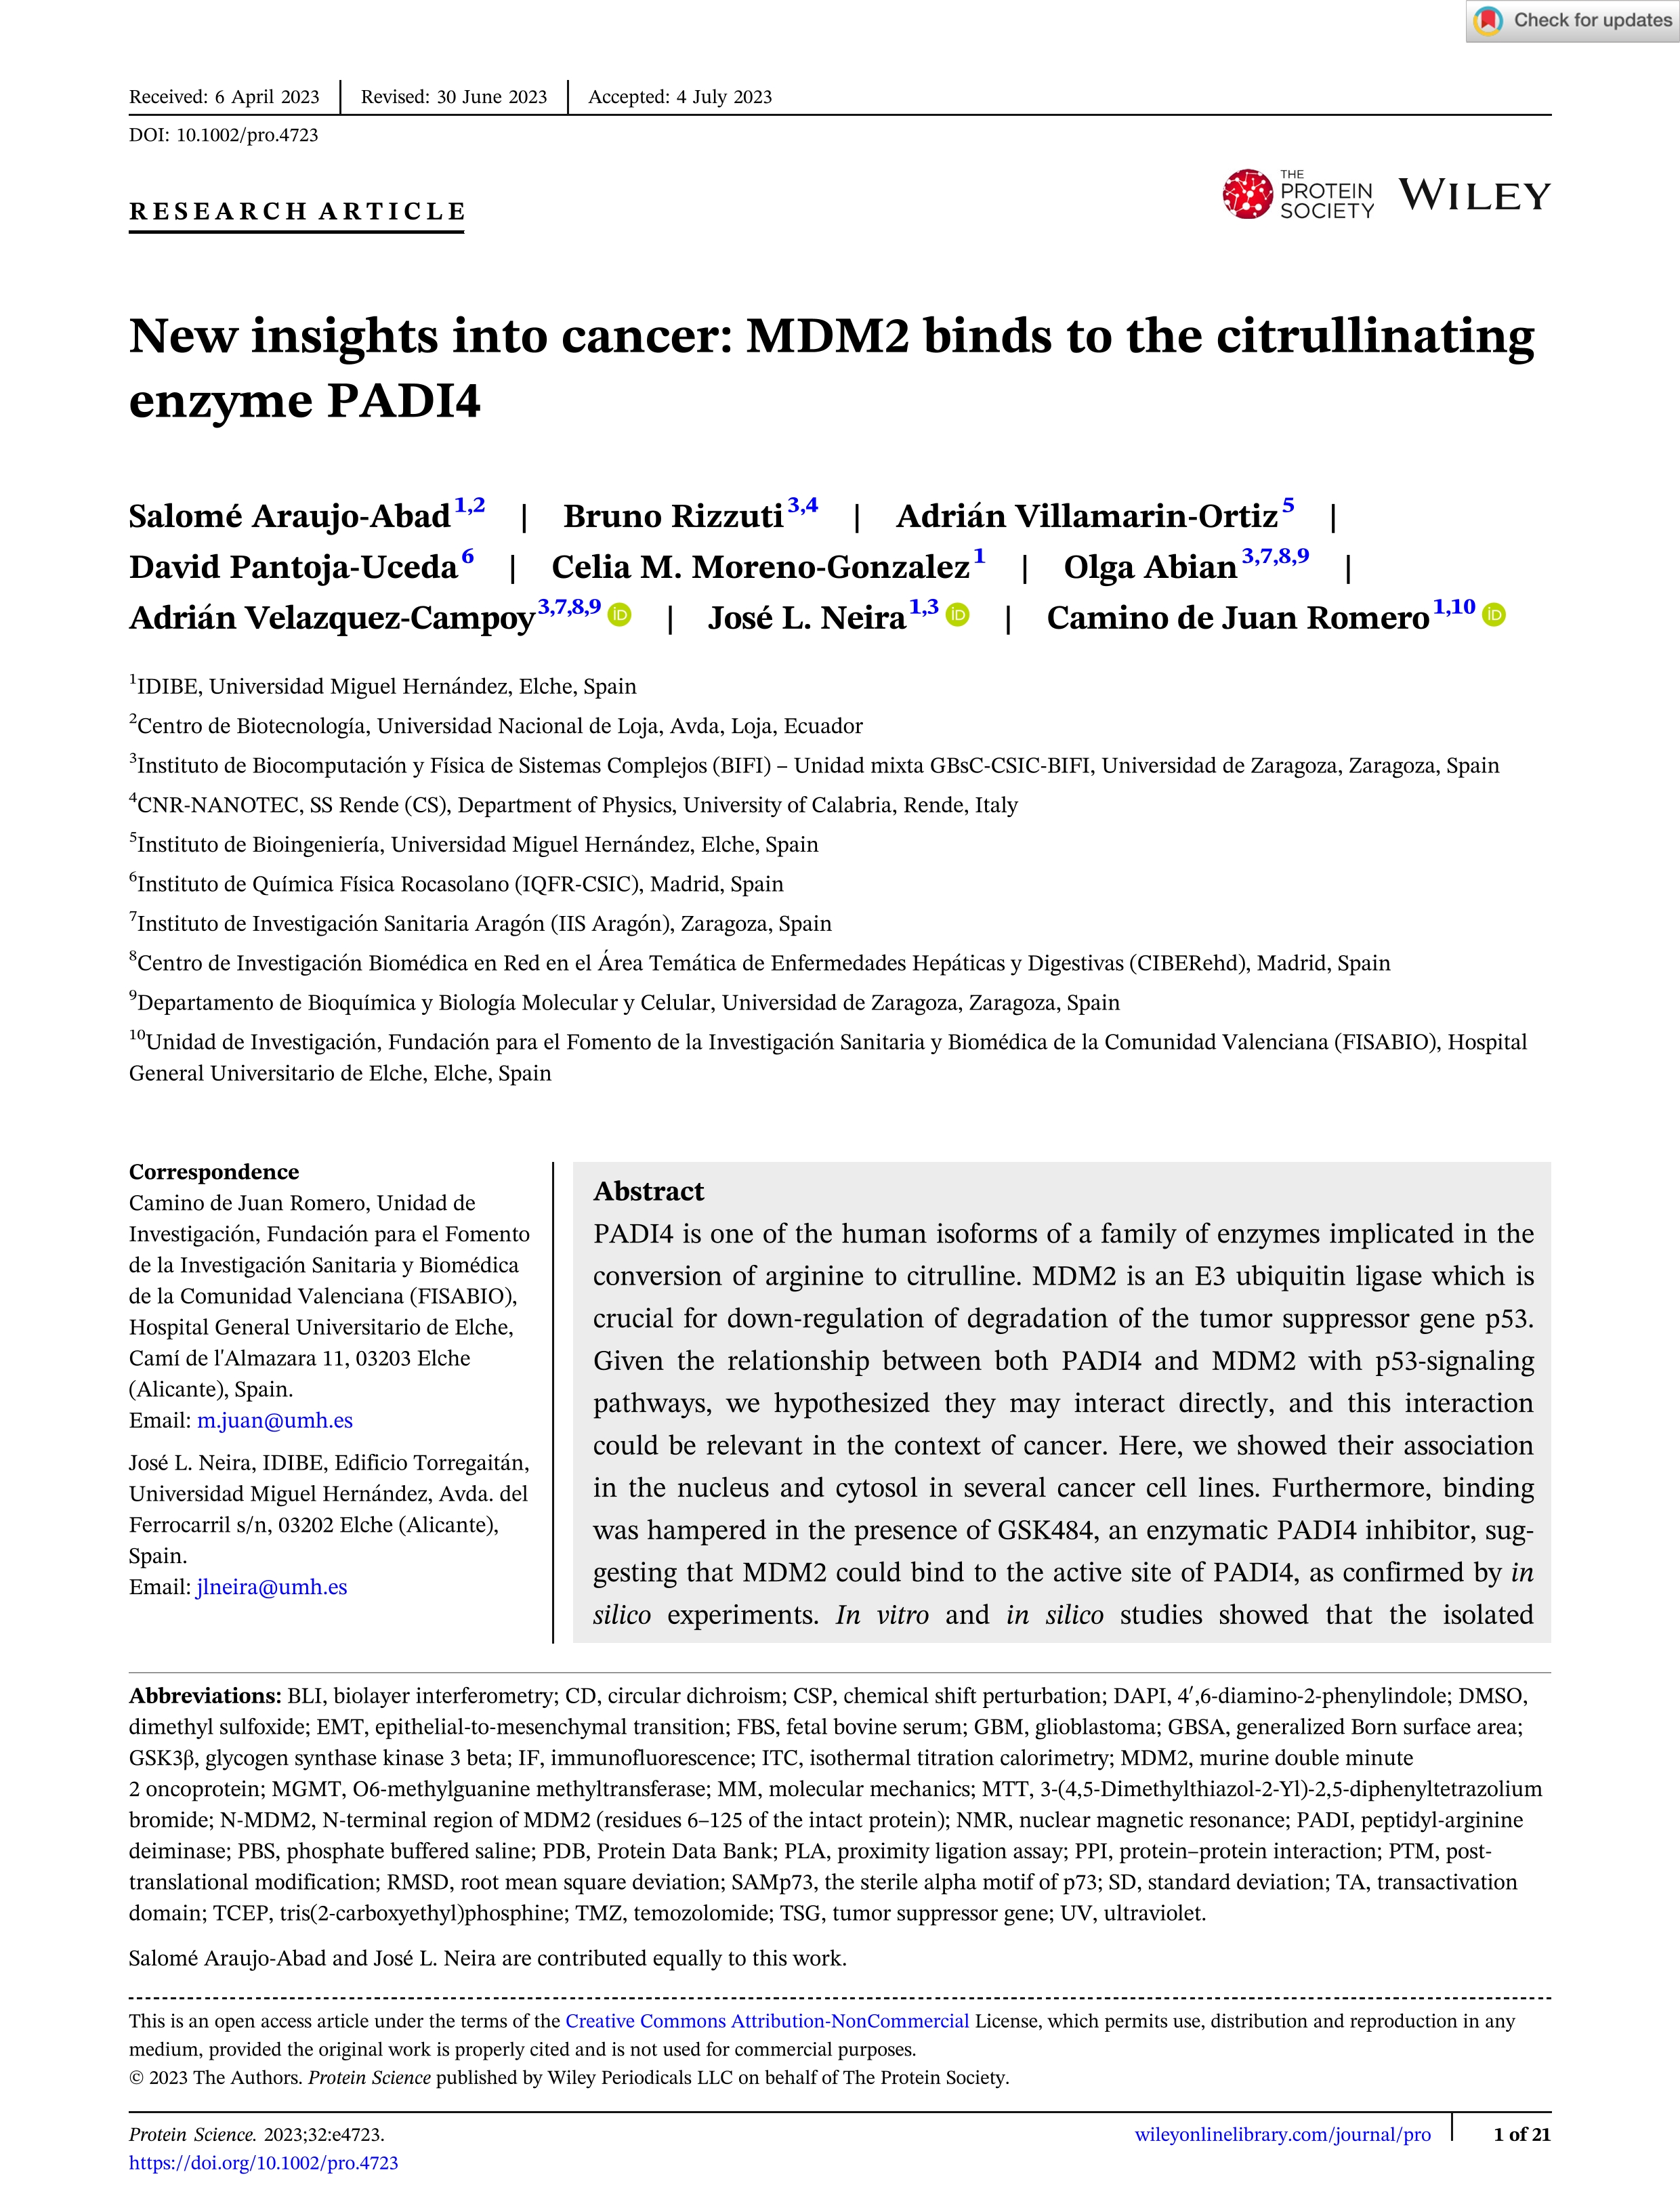 New insights into cancer: MDM2 binds to the citrullinating enzyme PADI4